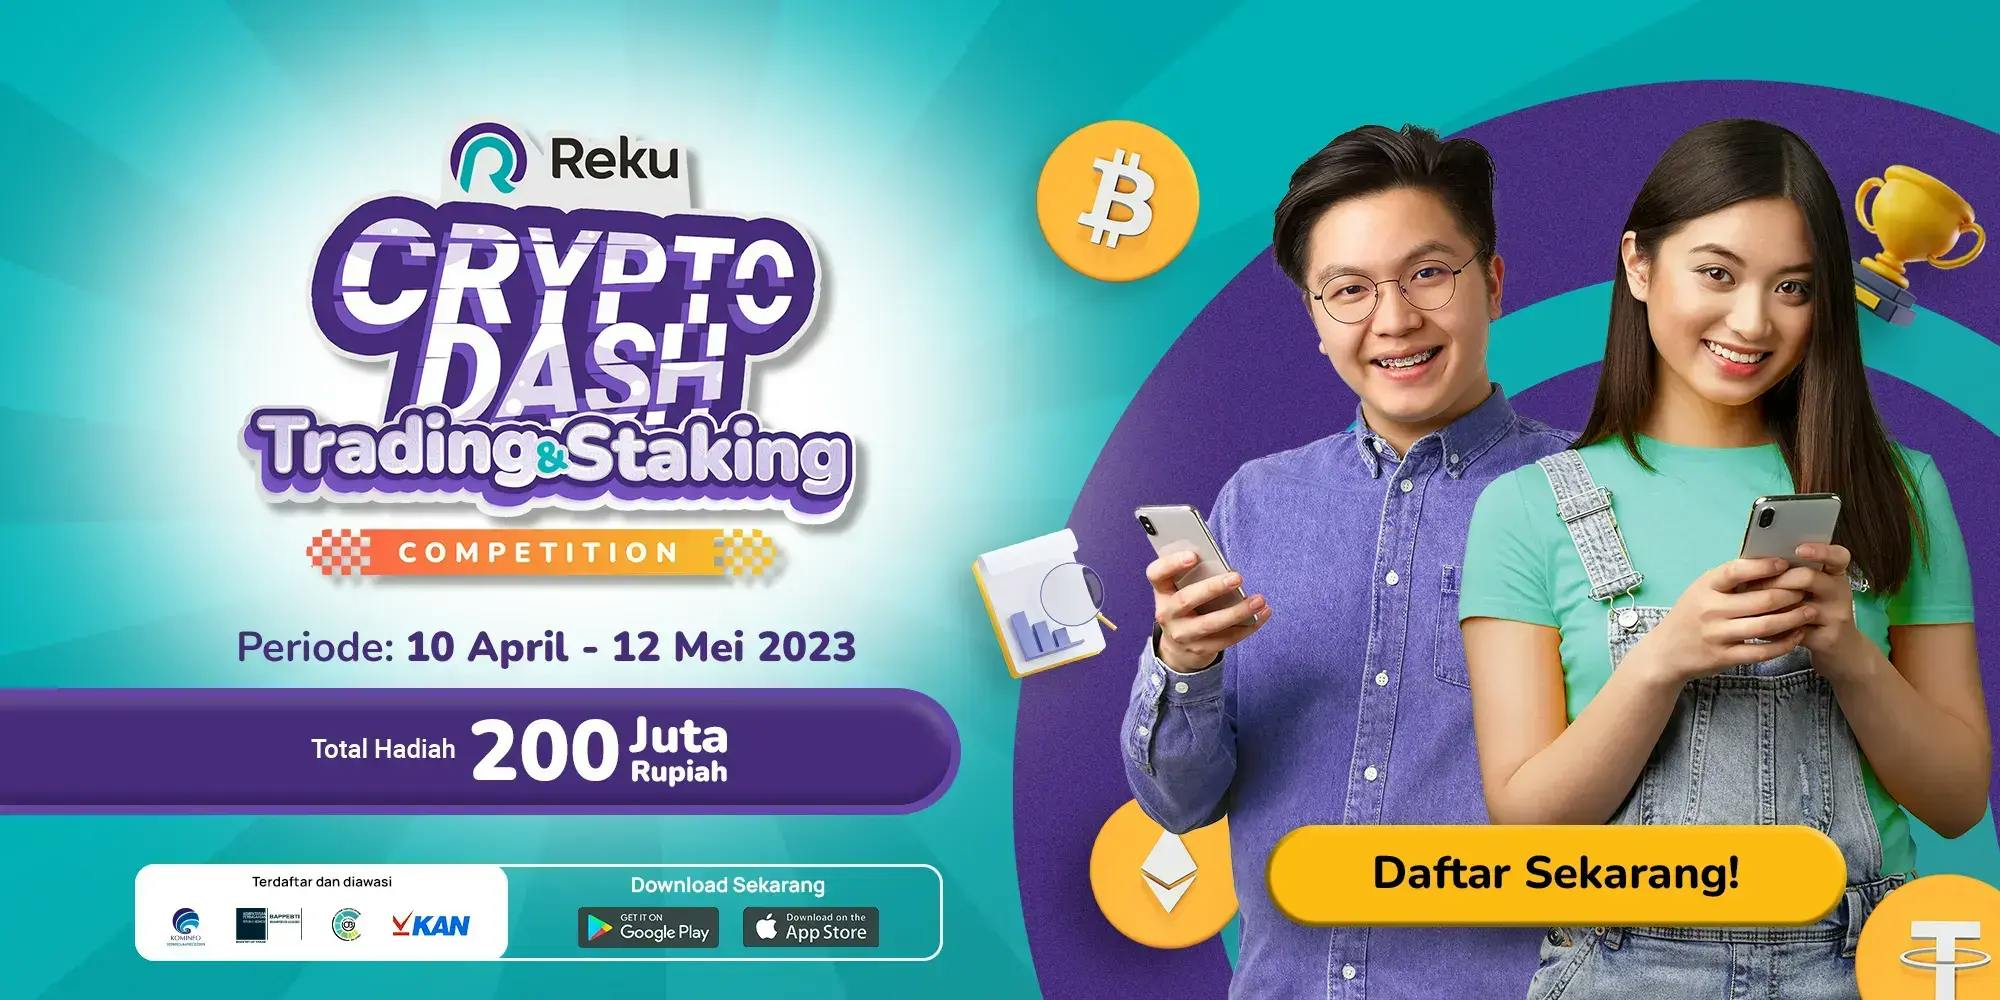 REKU CRYPTO DASH: TRADING & STAKING COMPETITION